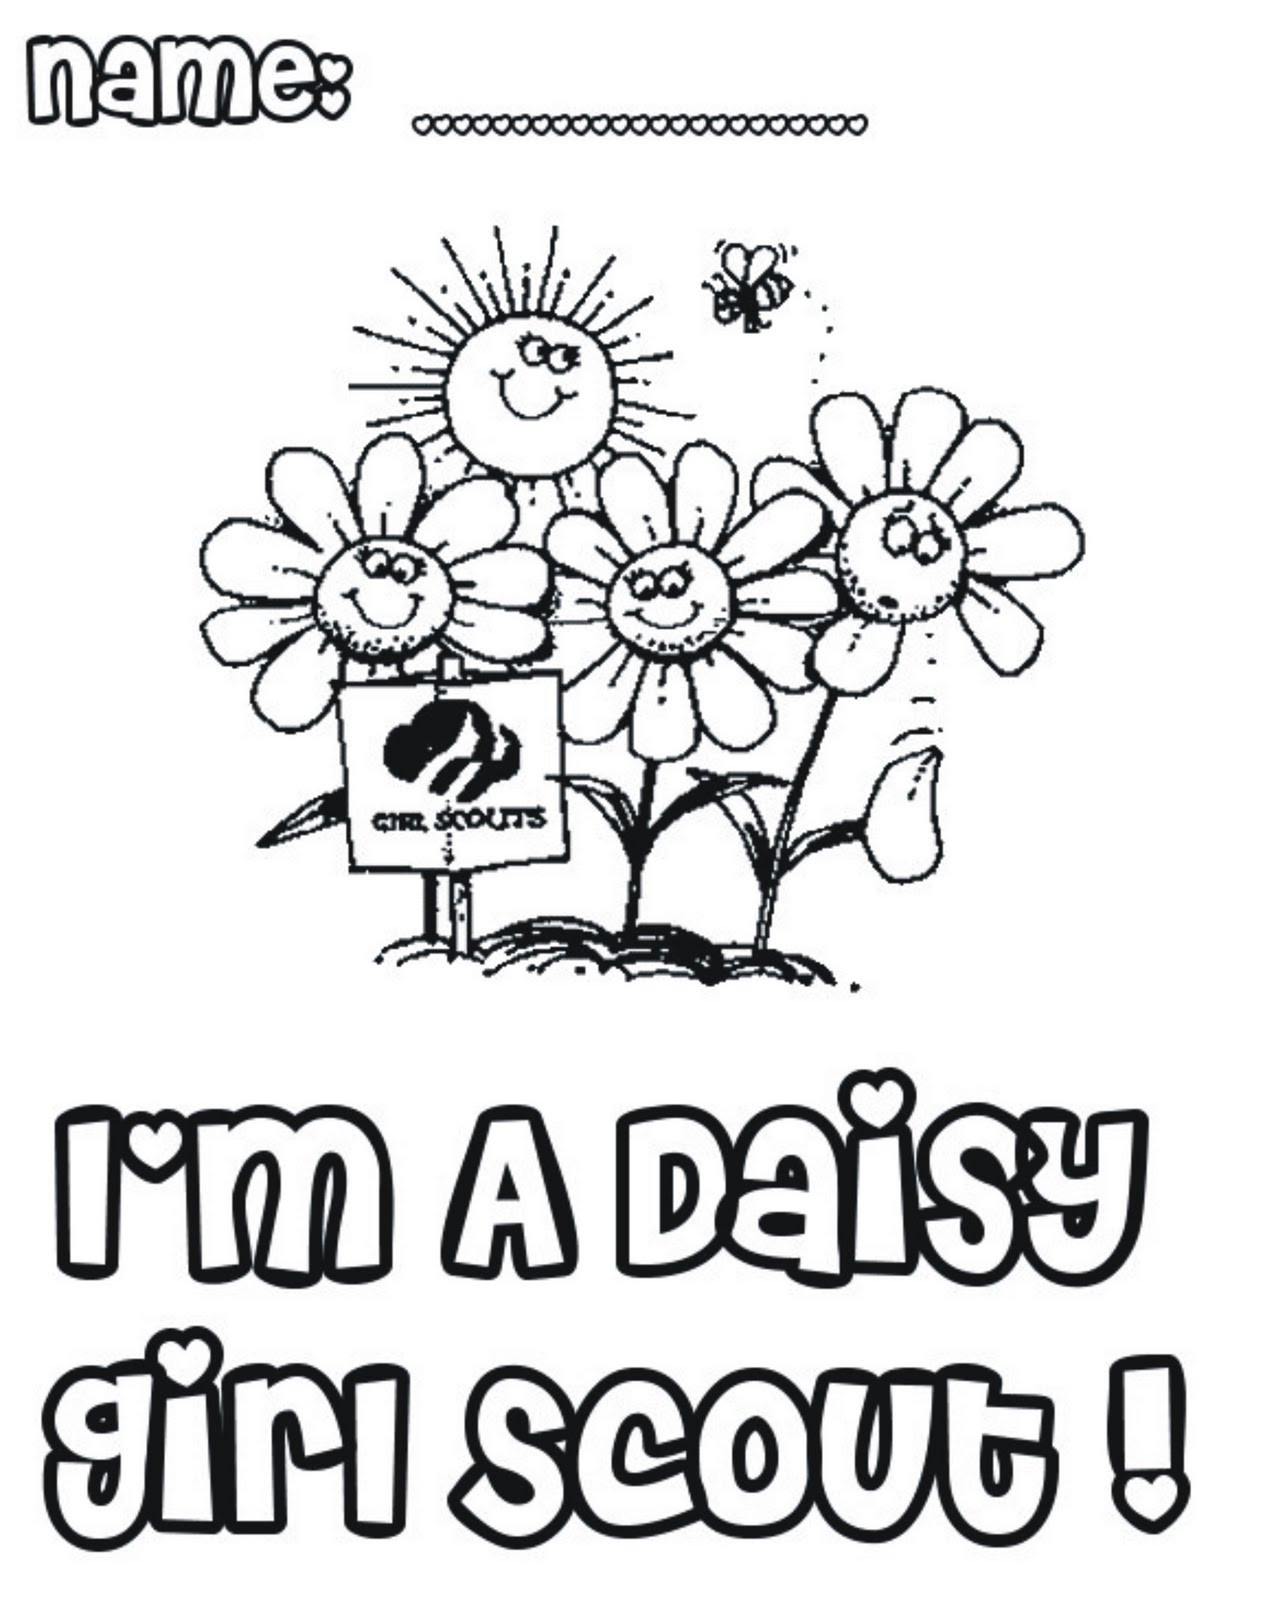 Girl Scout Daisies Coloring Pages
 Troop Leader Mom Getting Started with Girl Scout Daisies